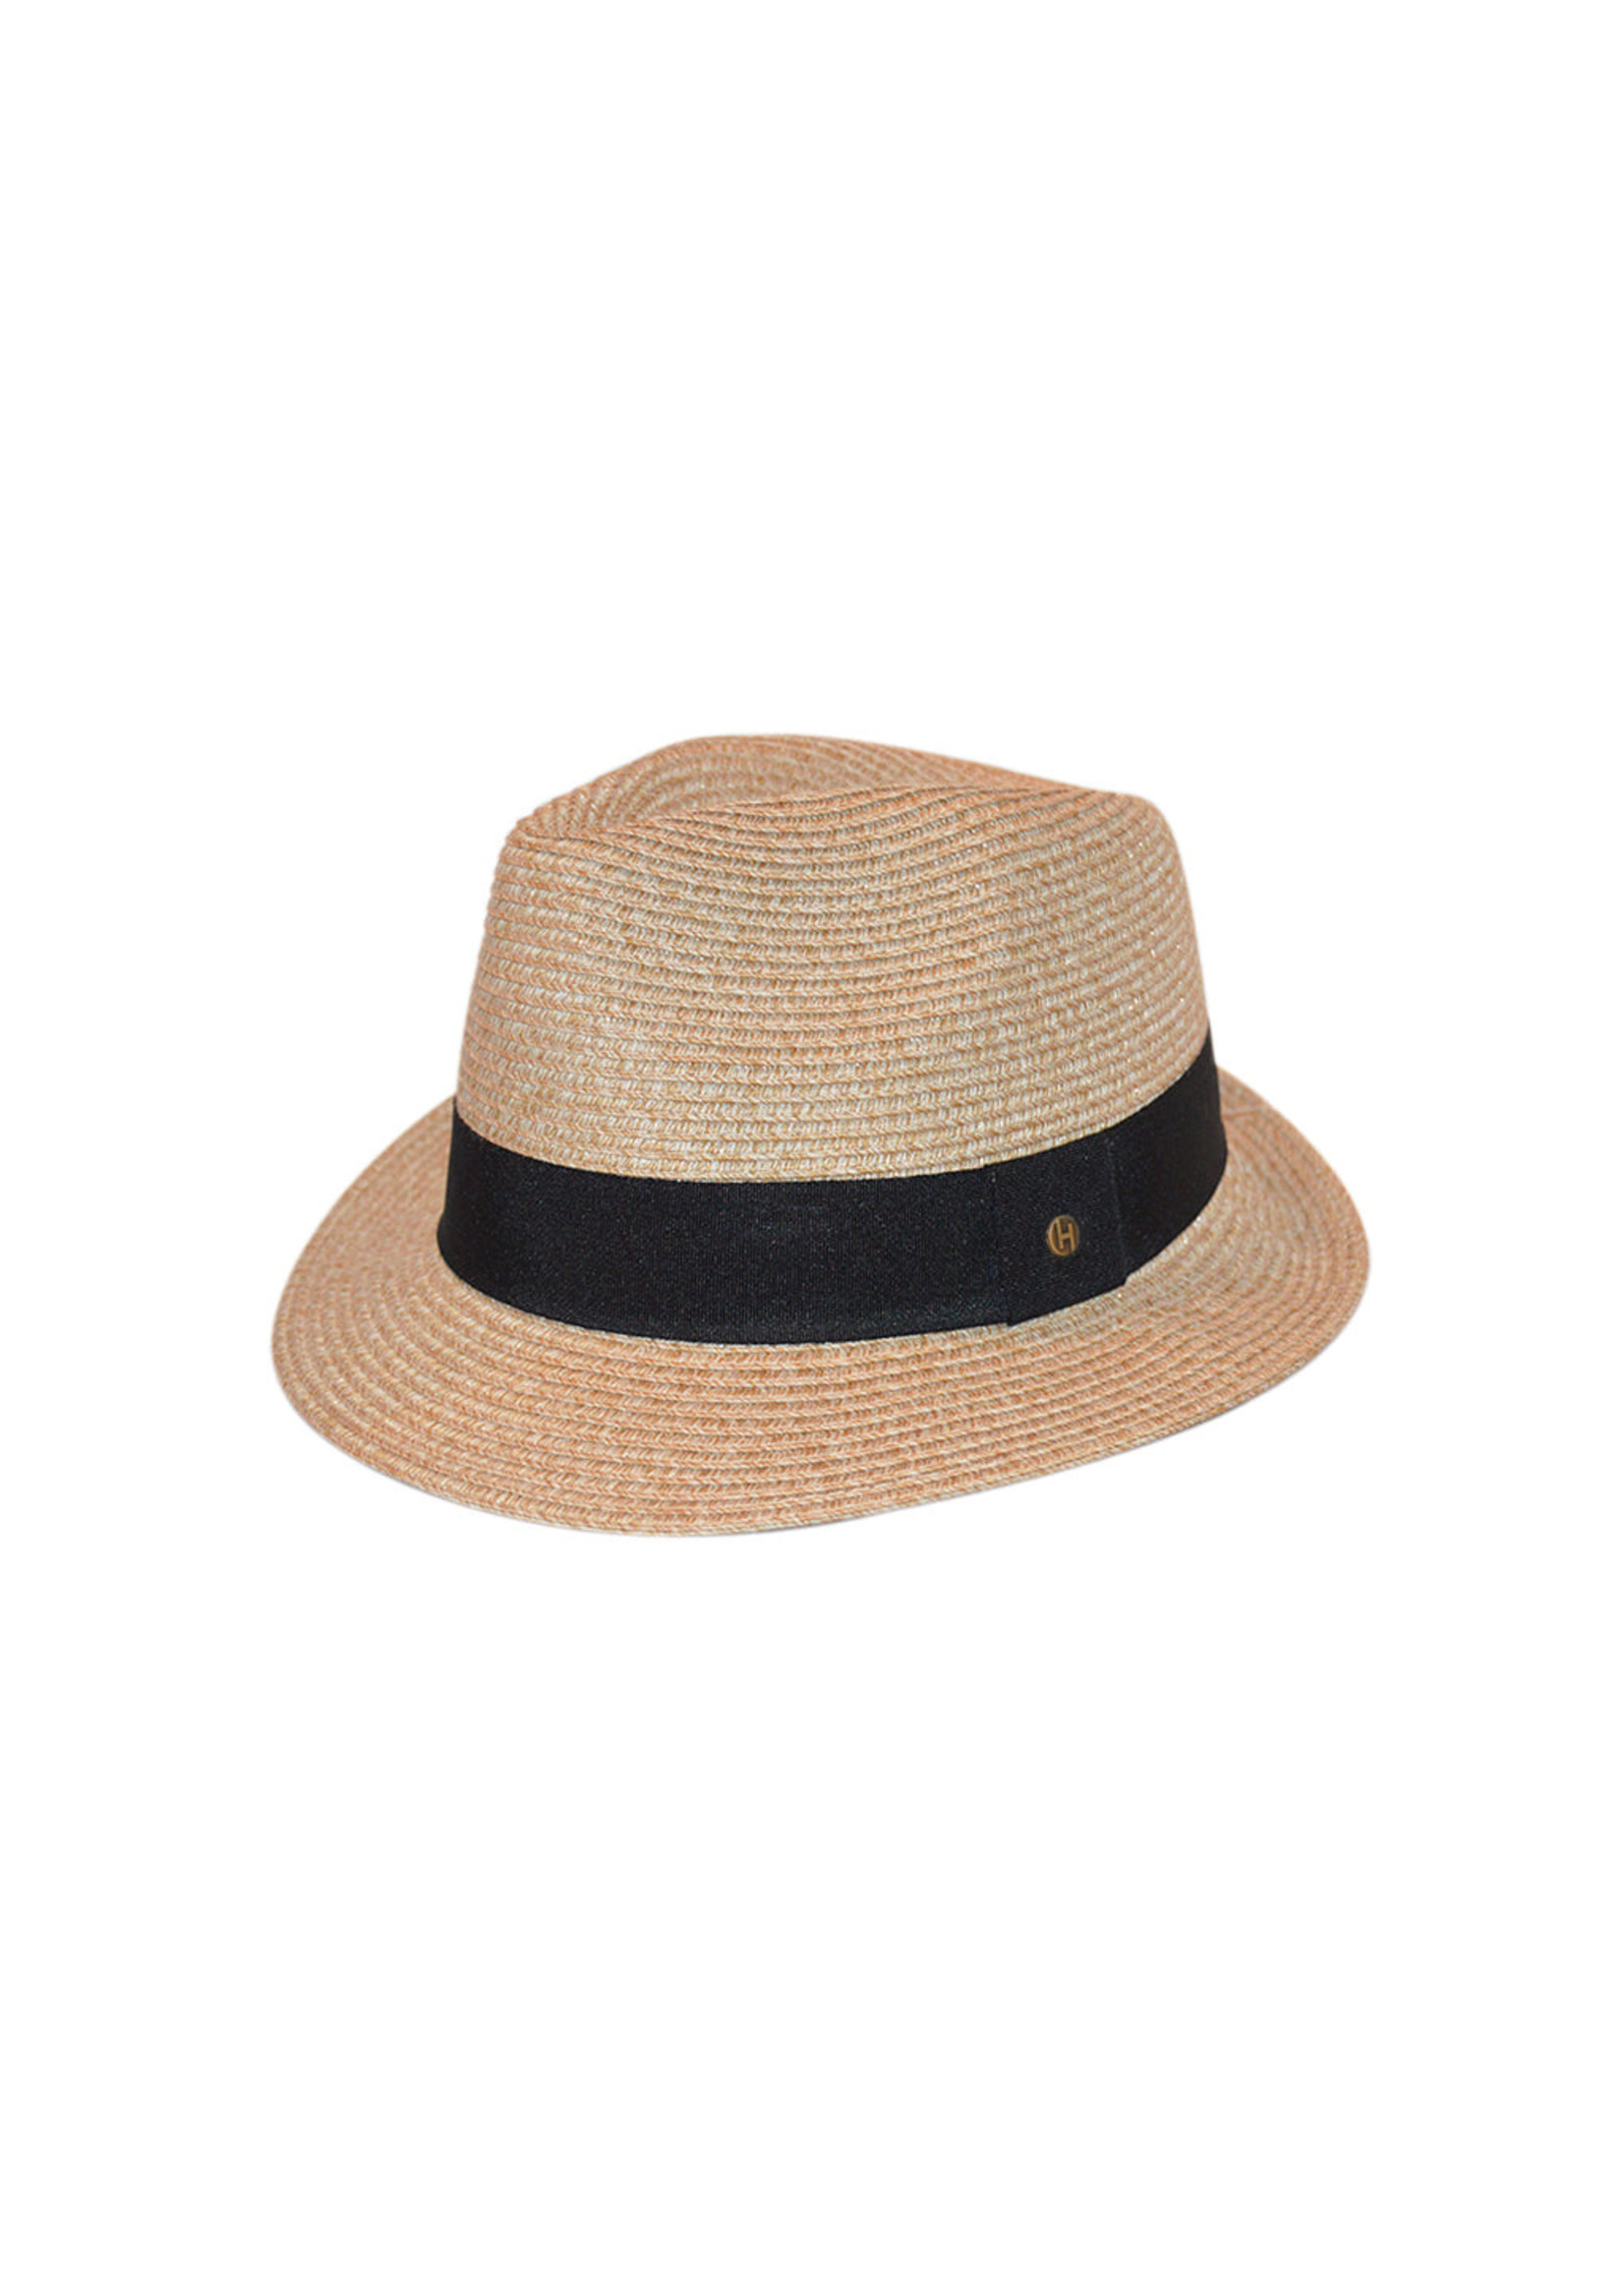 House of Ord - Cape Town Harley Trilby natural zonnehoed